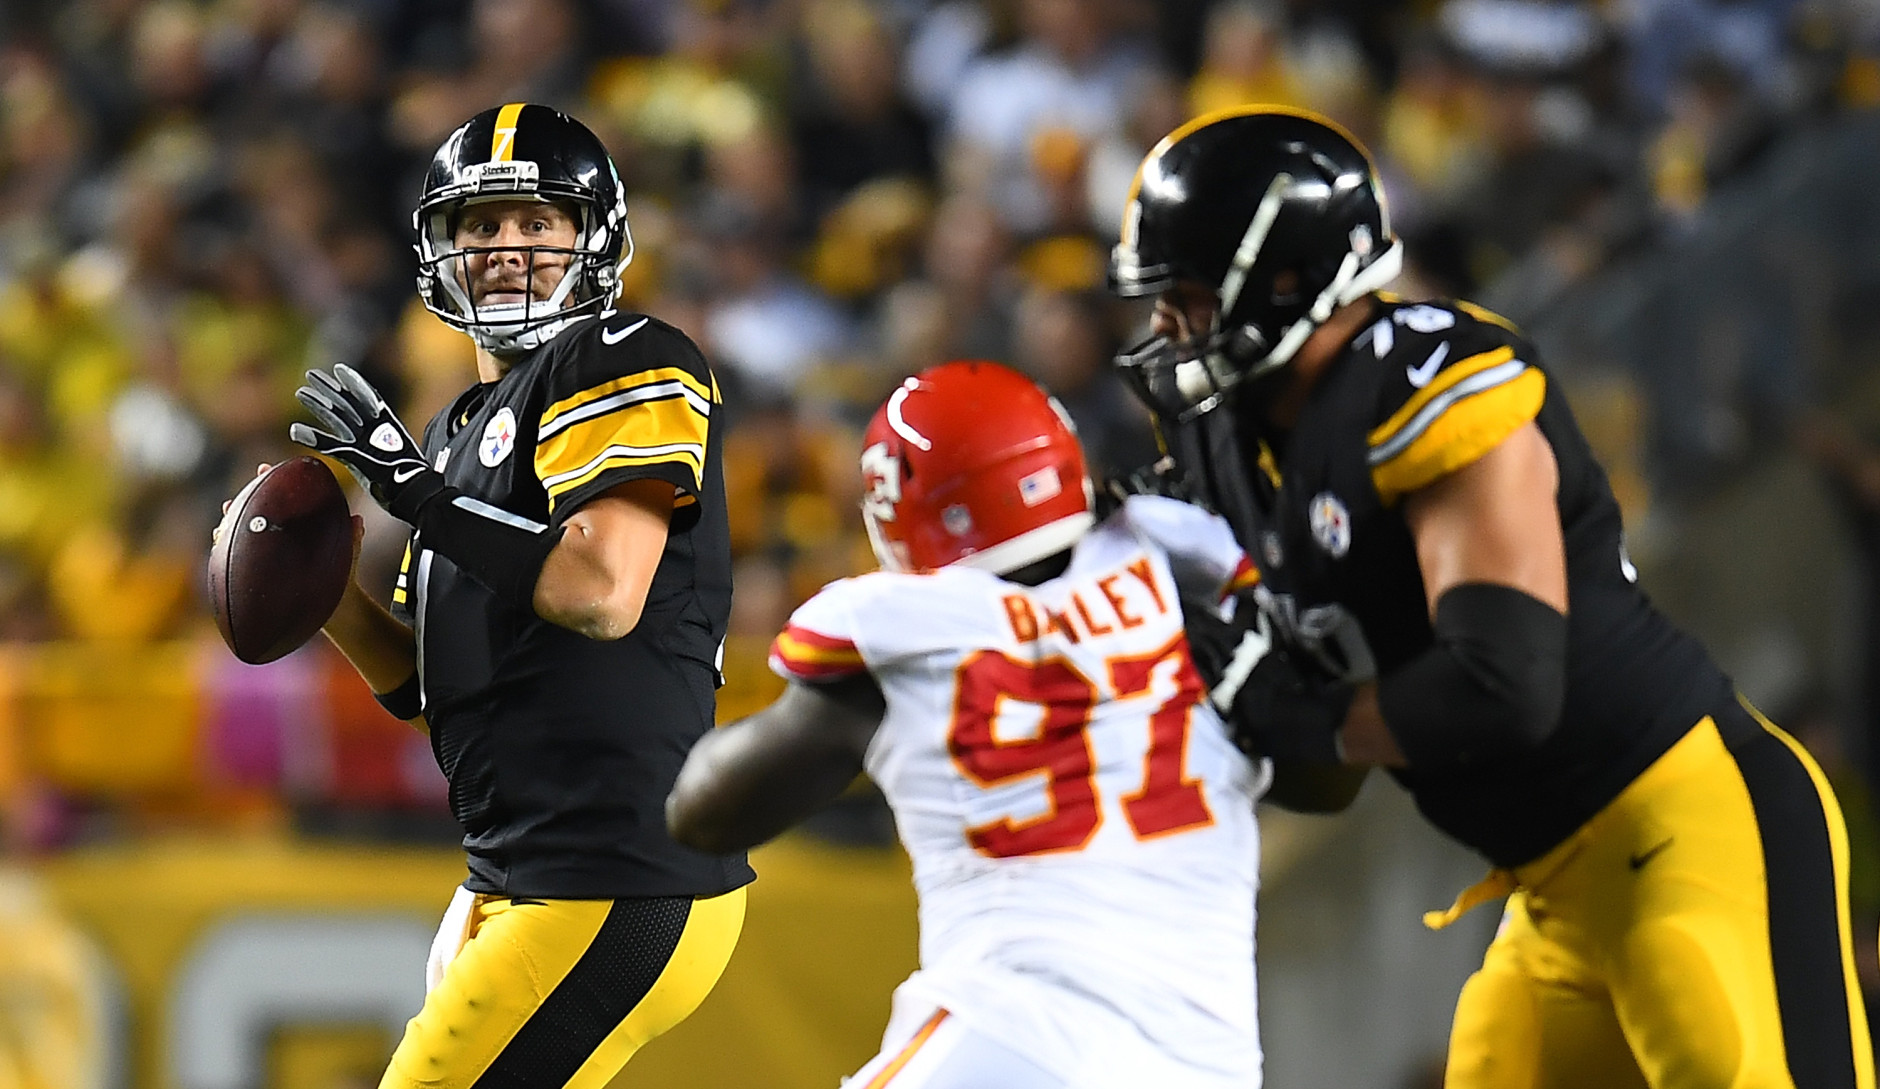 PITTSBURGH, PA - OCTOBER 02:  Ben Roethlisberger #7 of the Pittsburgh Steelers looks to pass in the second half during the game against the Kansas City Chiefs at Heinz Field on October 2, 2016 in Pittsburgh, Pennsylvania. (Photo by Joe Sargent/Getty Images)